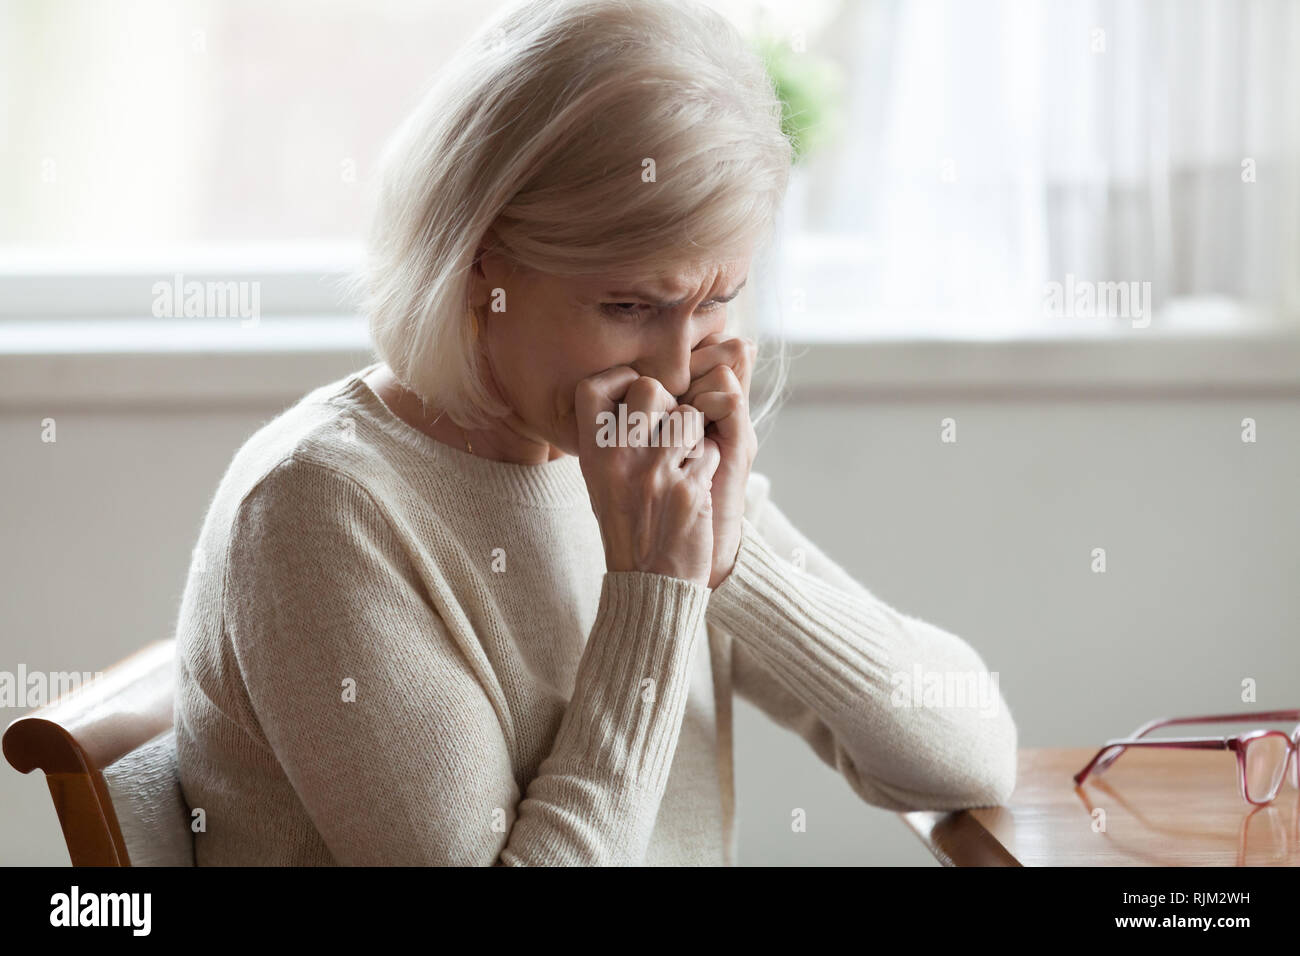 Middle aged woman sitting at table crying Stock Photo